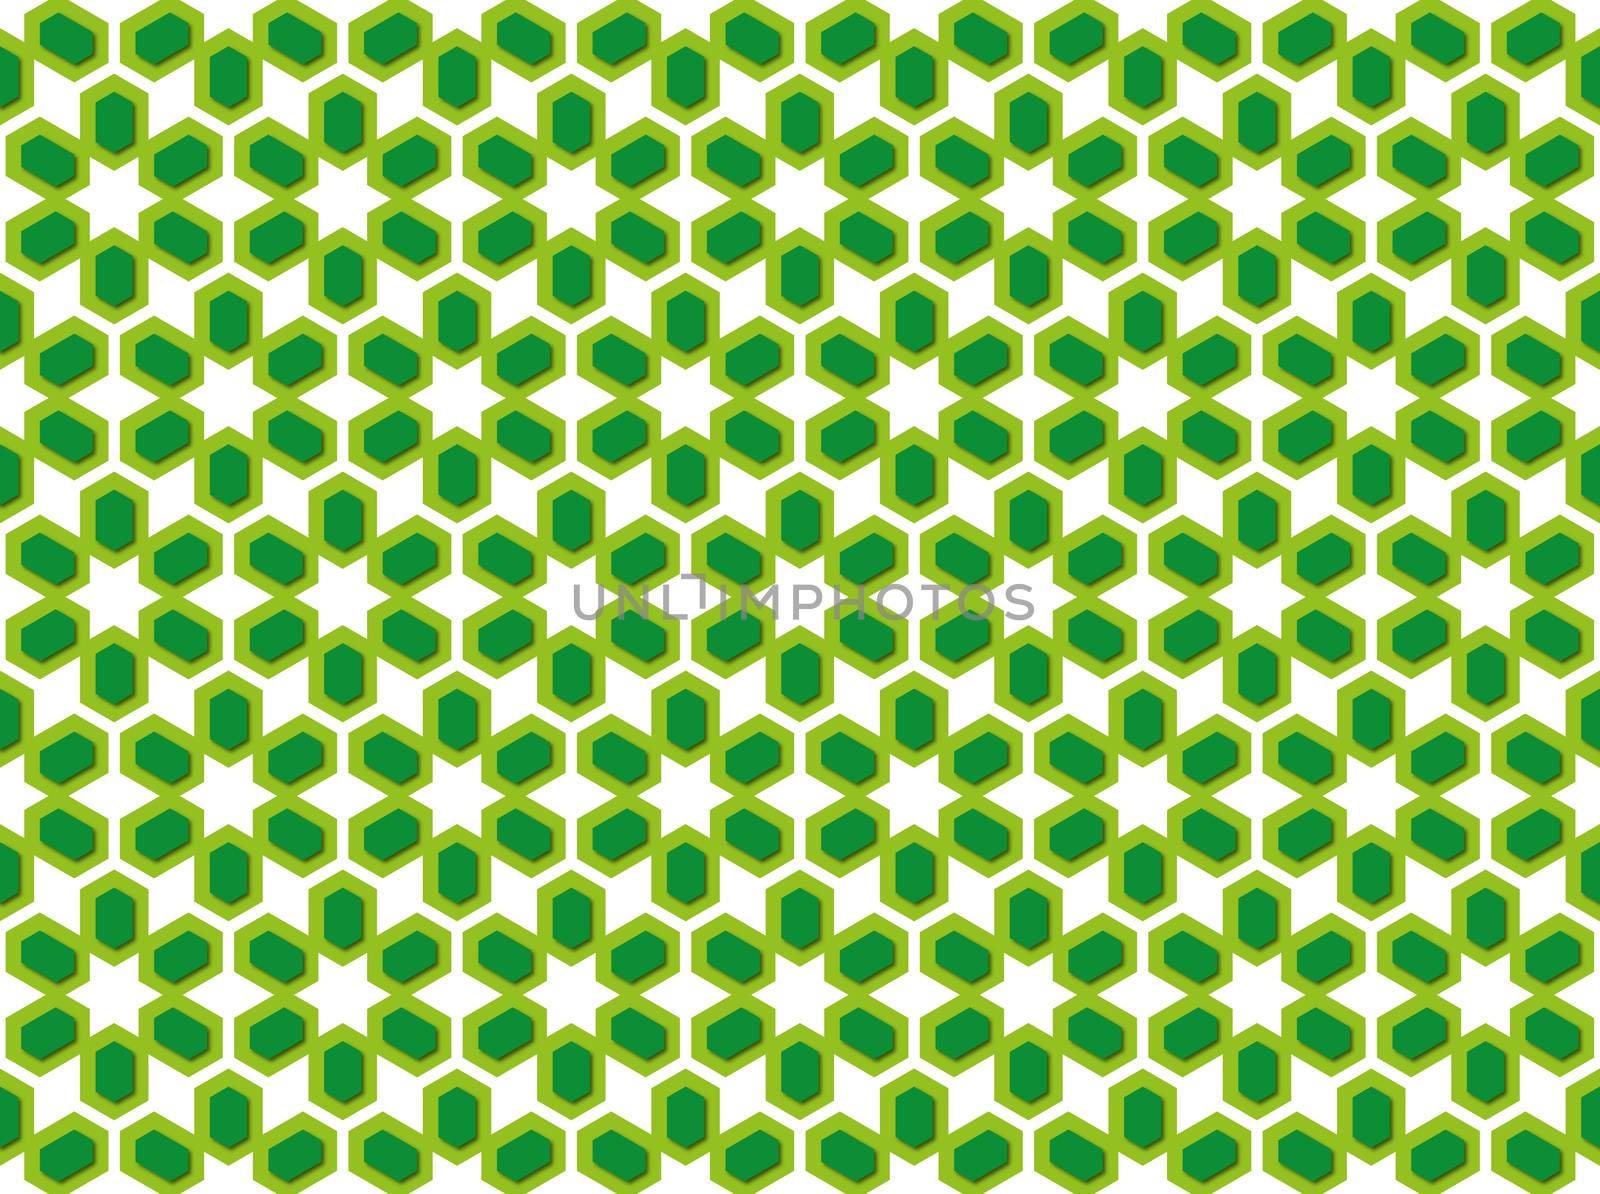 background or paper abstract pattern with a stylized hexagonal flower